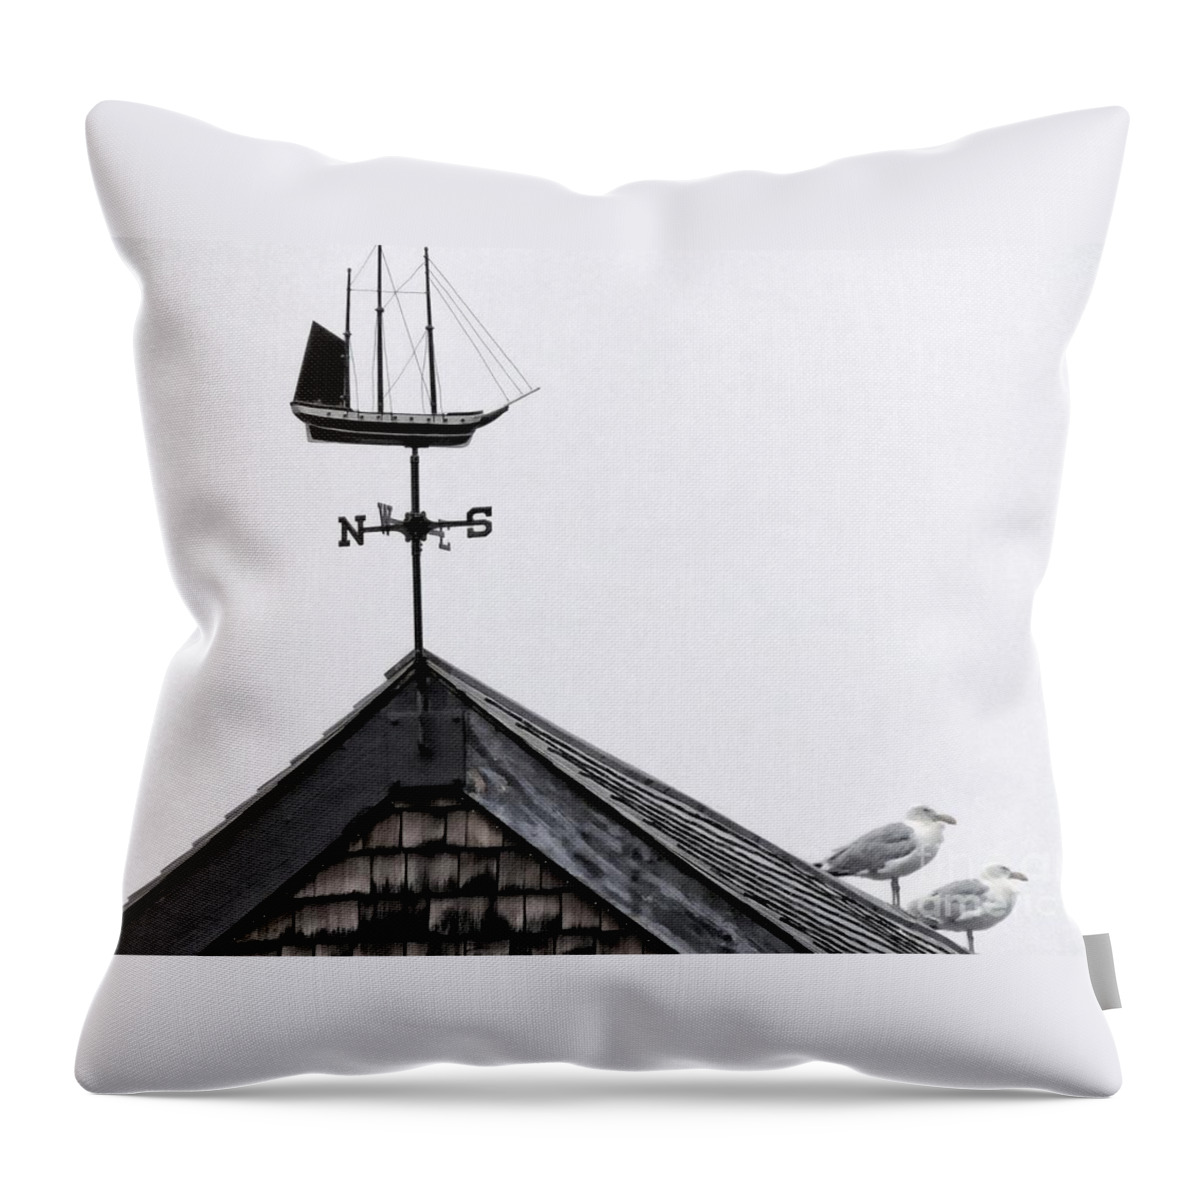 Landmark Throw Pillow featuring the photograph Facing South by Marcia Lee Jones